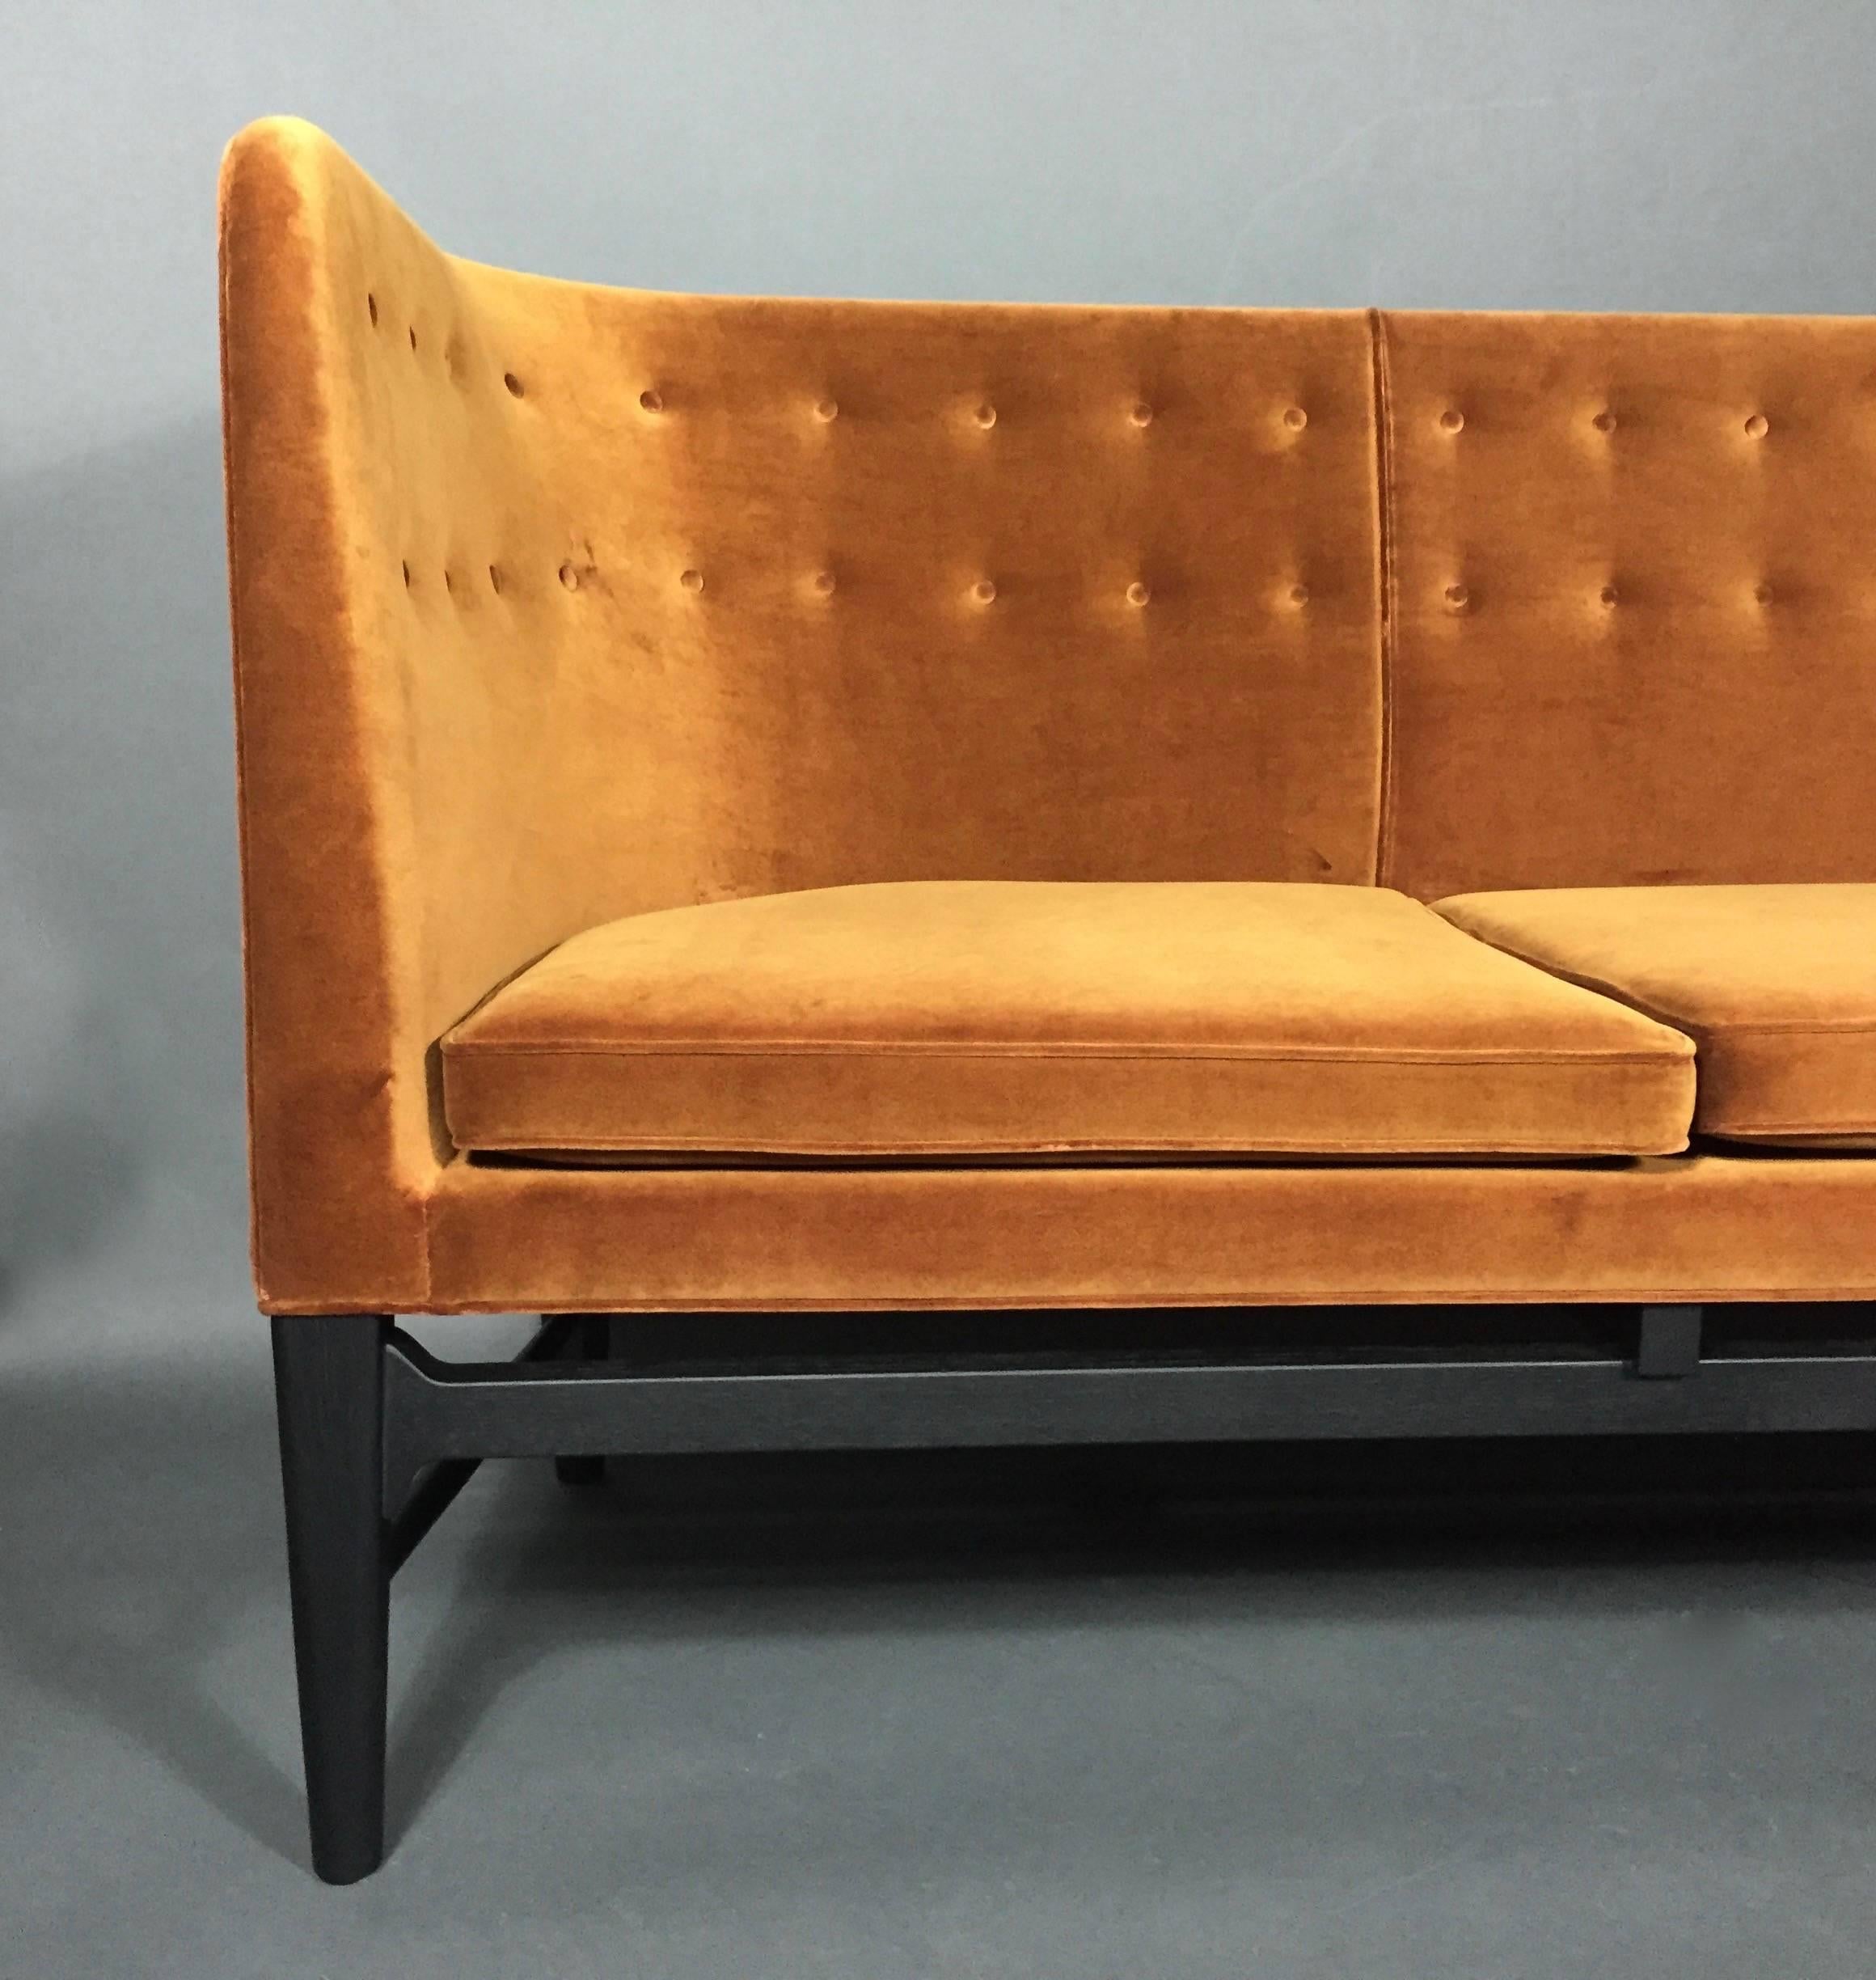 The gorgeous modern sofa was designed in 1939 as part of an architecture project for a city hall in Søllerød, Denmark. Both Arne Jacobsen and Flemming Lassen designed every aspect of the project from building to furniture - with the original sofa